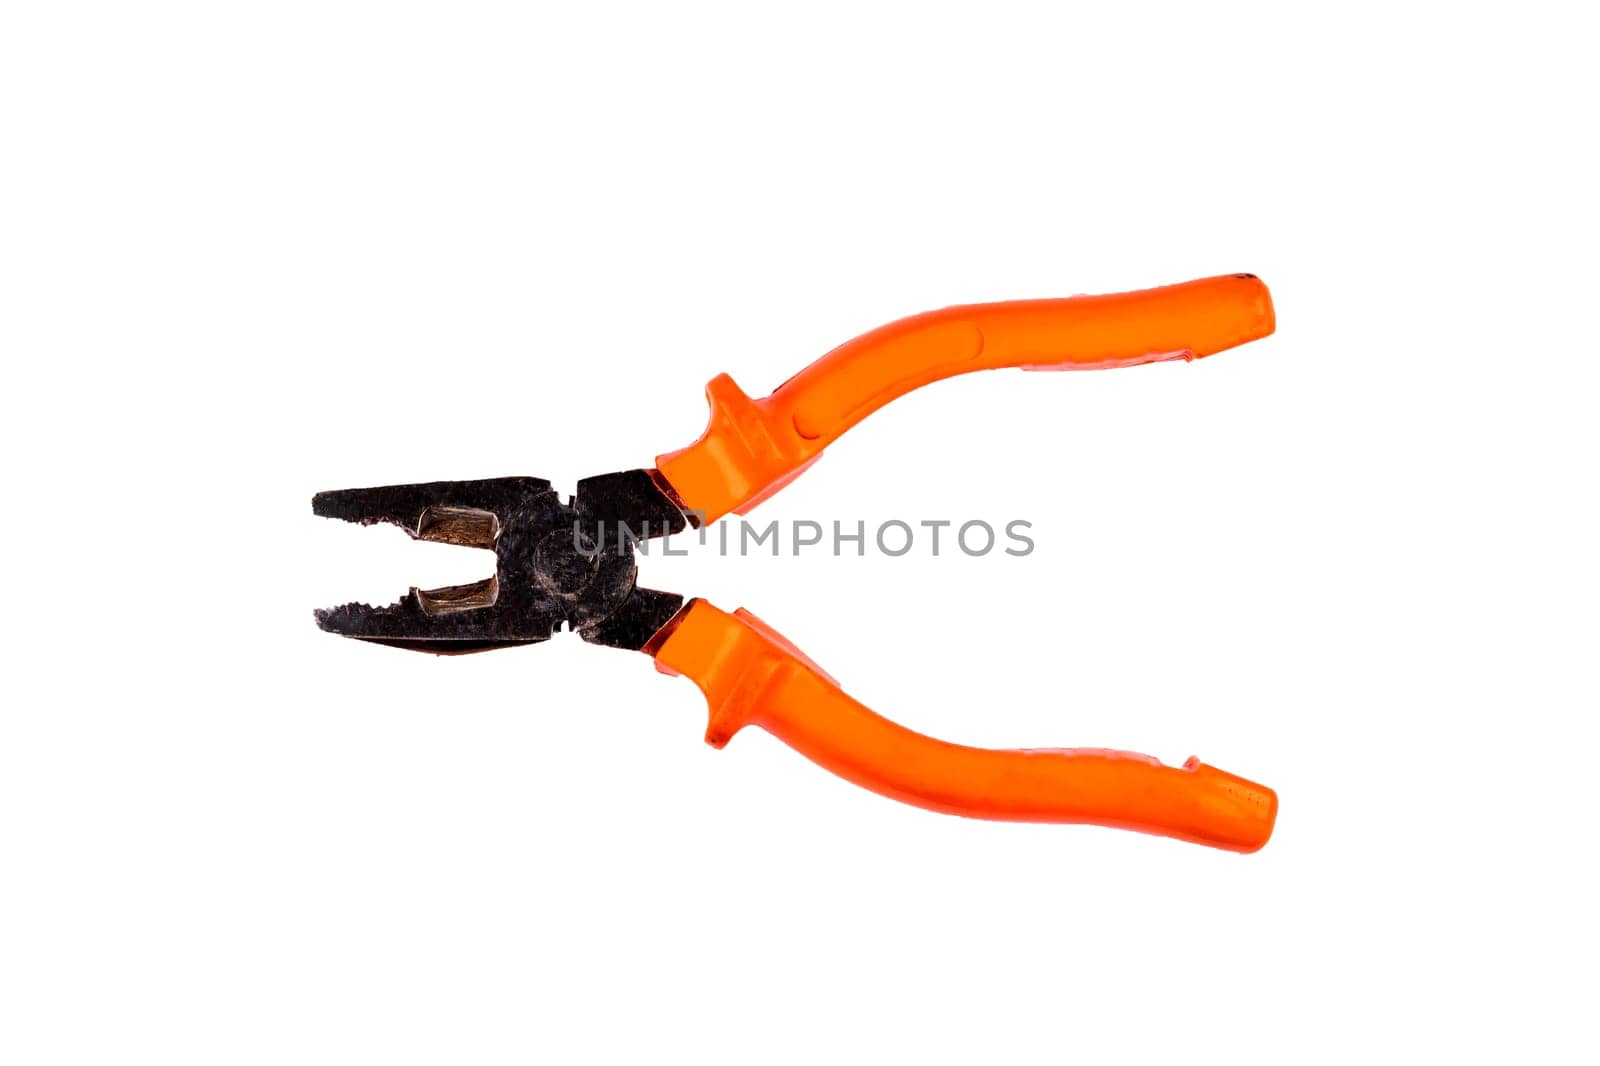 Used pliers with orange rubber handles, isolated on white background